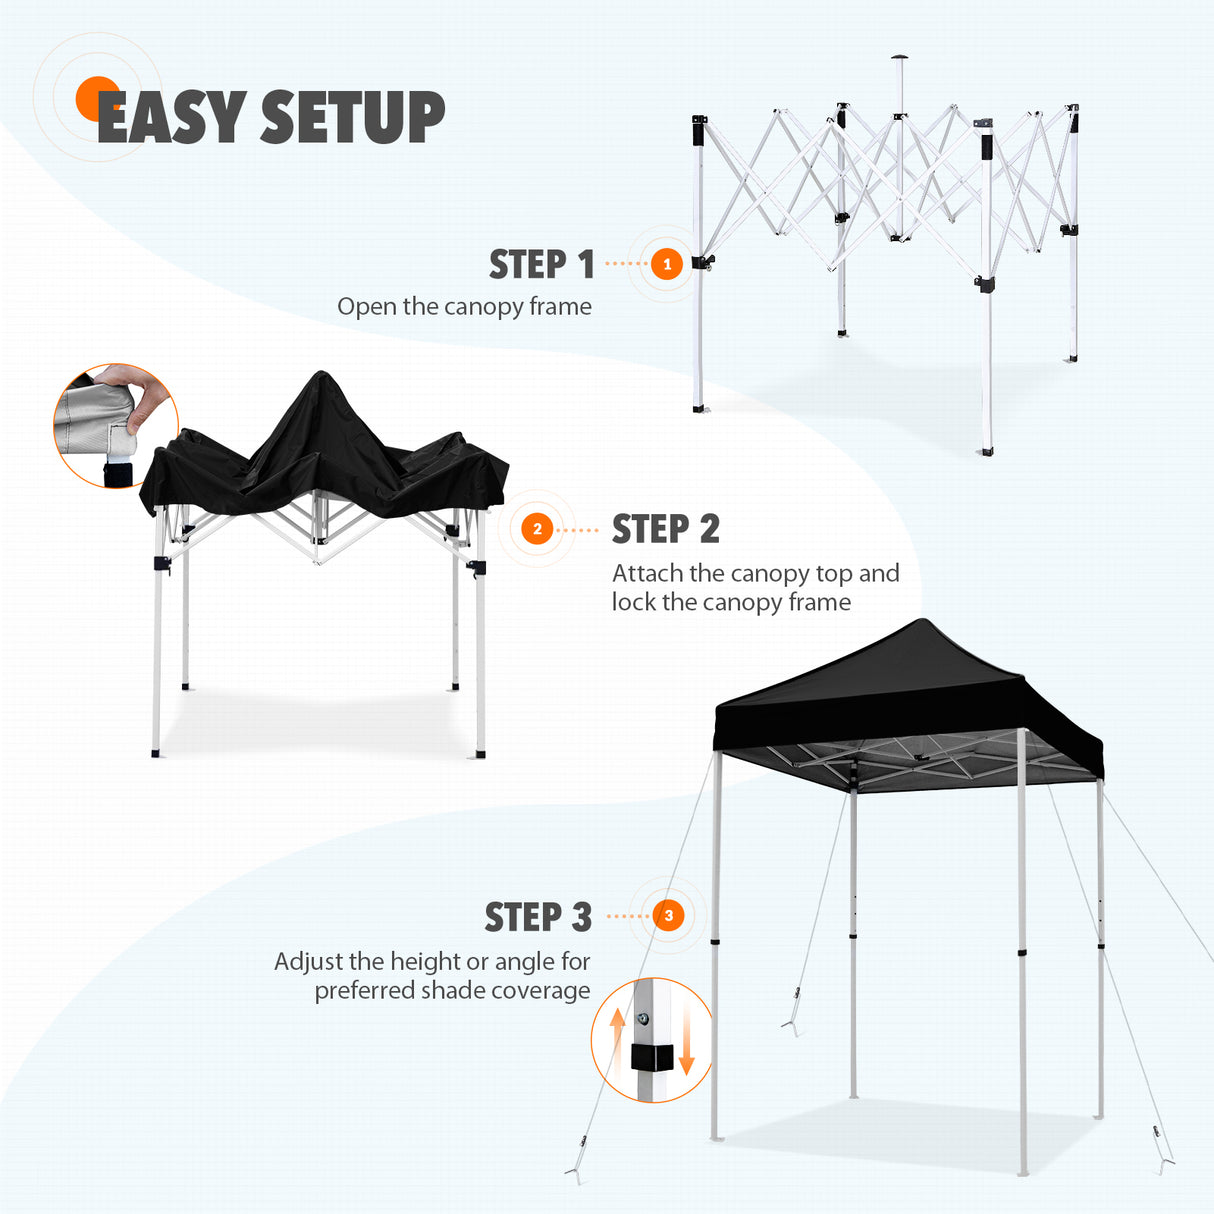 EAGLE PEAK 5x5 Pop Up Canopy Tent Instant Outdoor Canopy Easy Set-up Straight Leg Folding Shelter